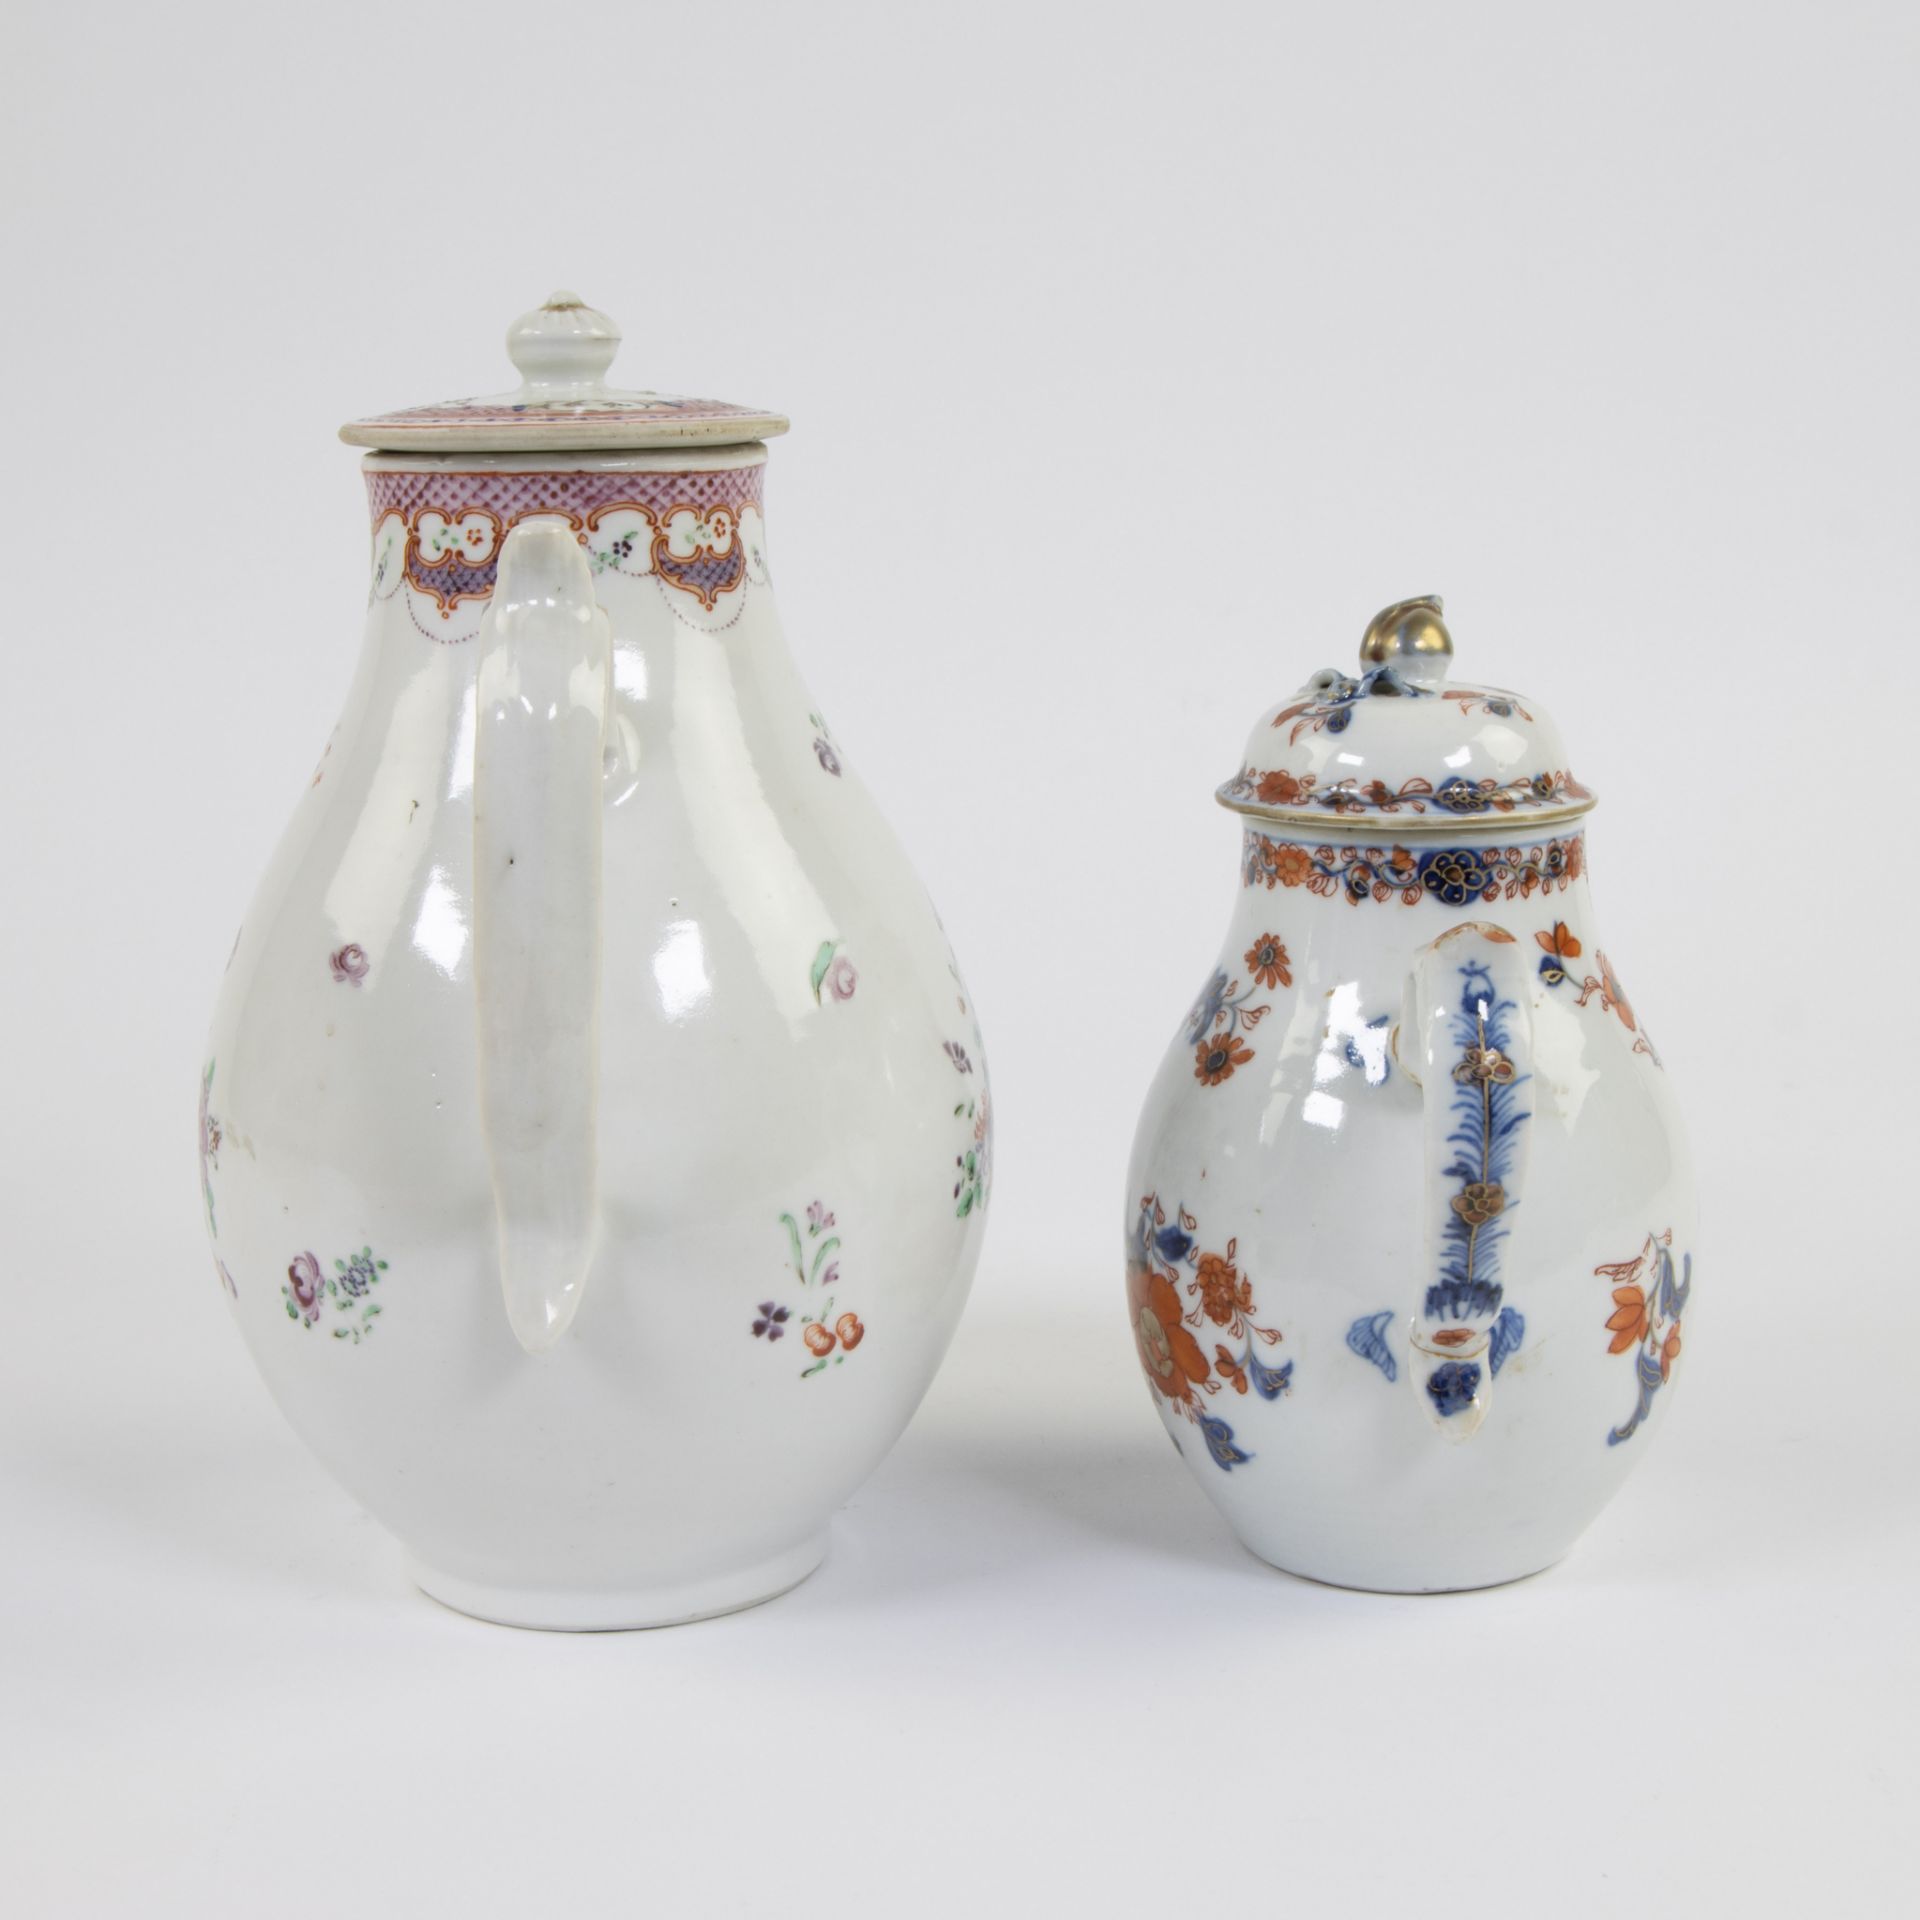 Collection of 2 Chinese teapots famille rose and Imari, 18th century - Image 4 of 8